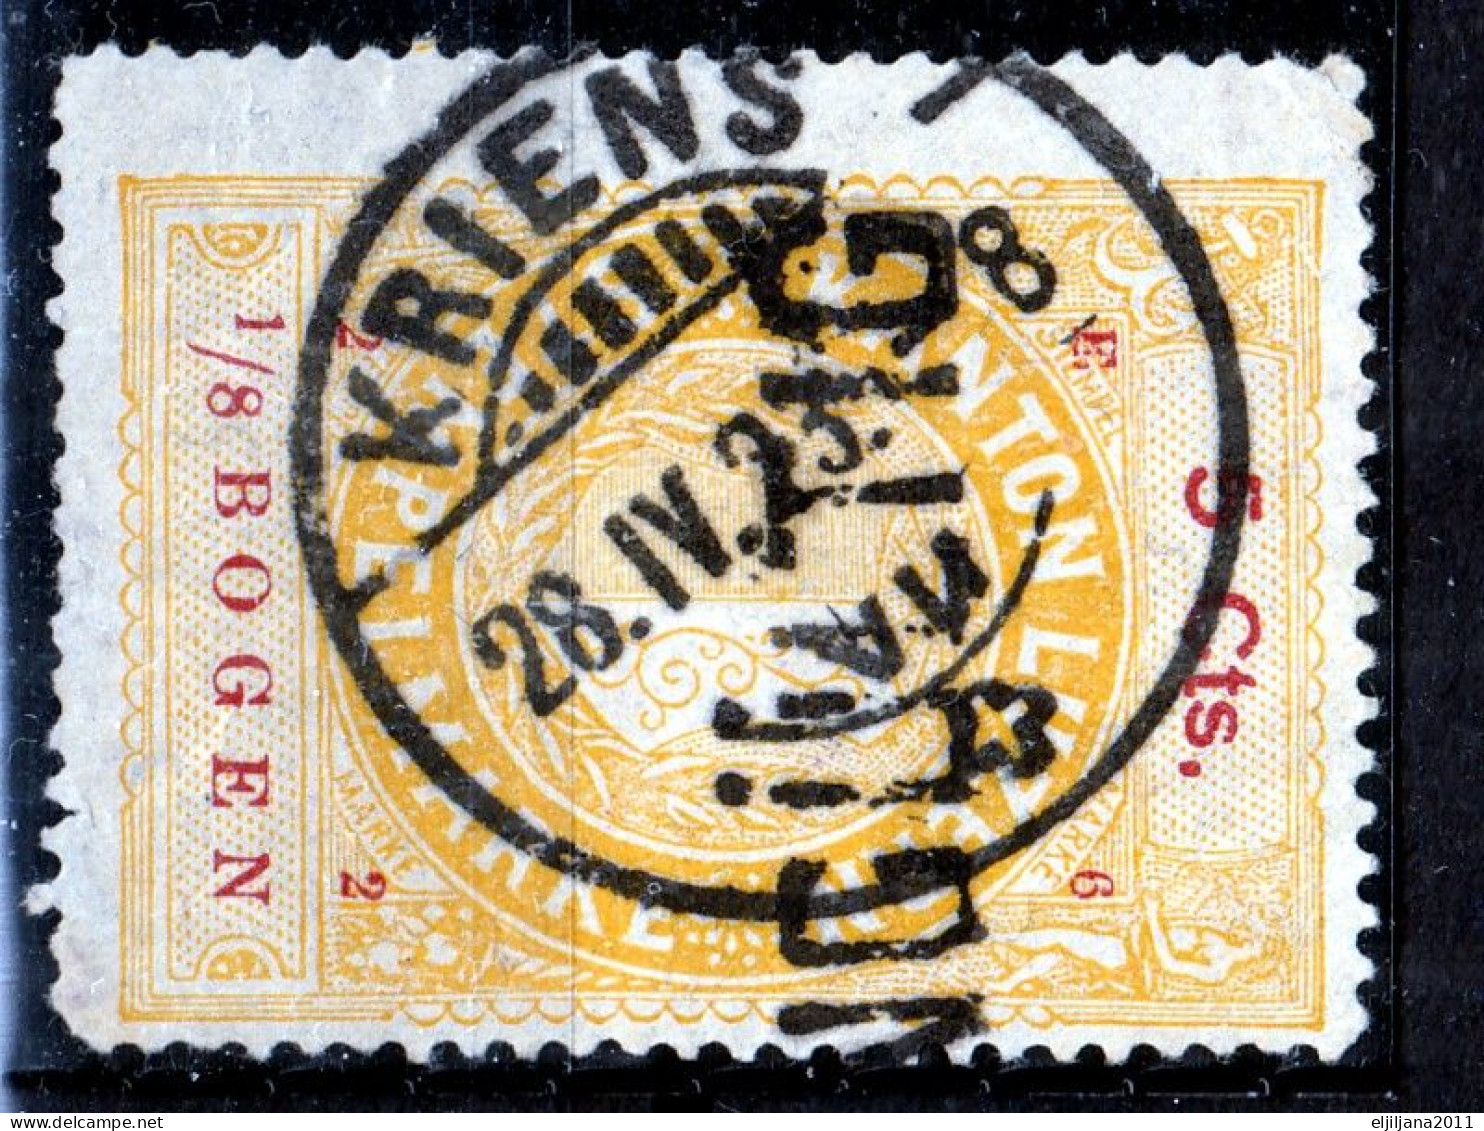 Action !! SALE !! 50 % OFF !! ⁕ Switzerland 1923 Canton LUZERN Revenue Taxe Fiscal 5 Cts, 1/8 Bogen ⁕ 1v Used - KRIENS - Revenue Stamps